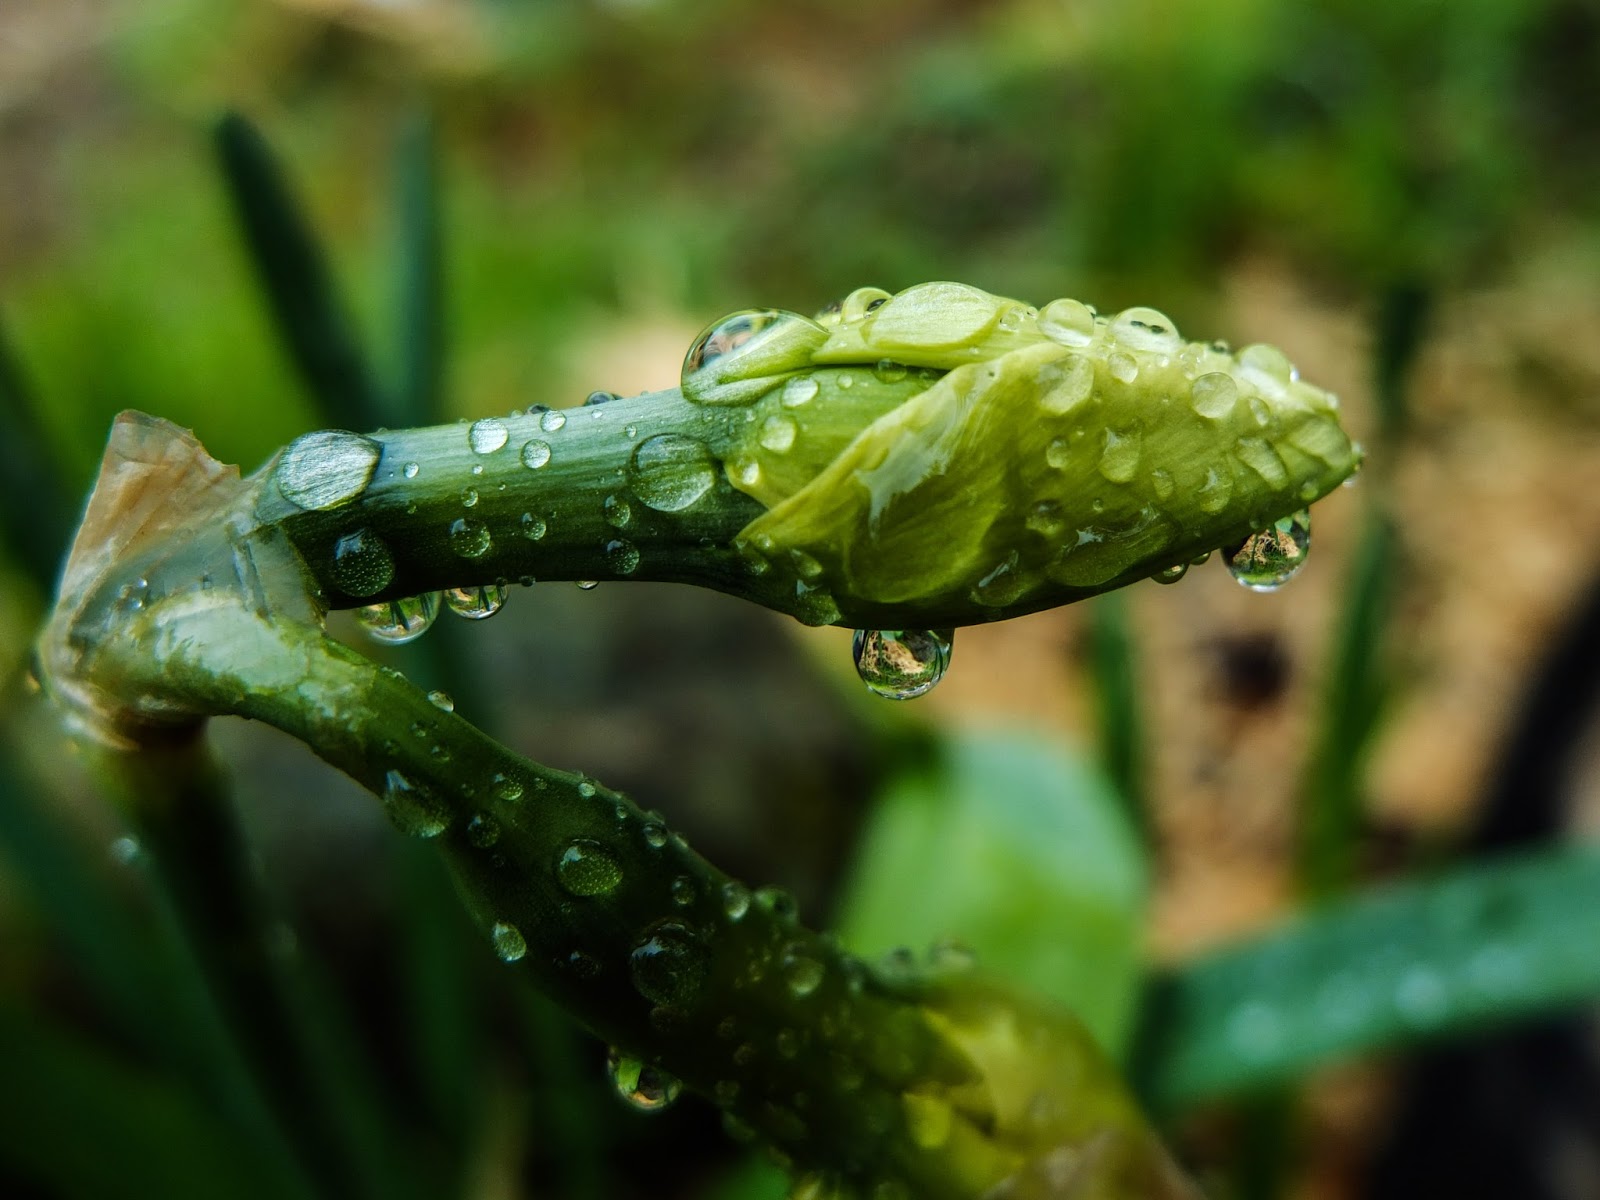 A close up of daffodil buds covered in water droplets.